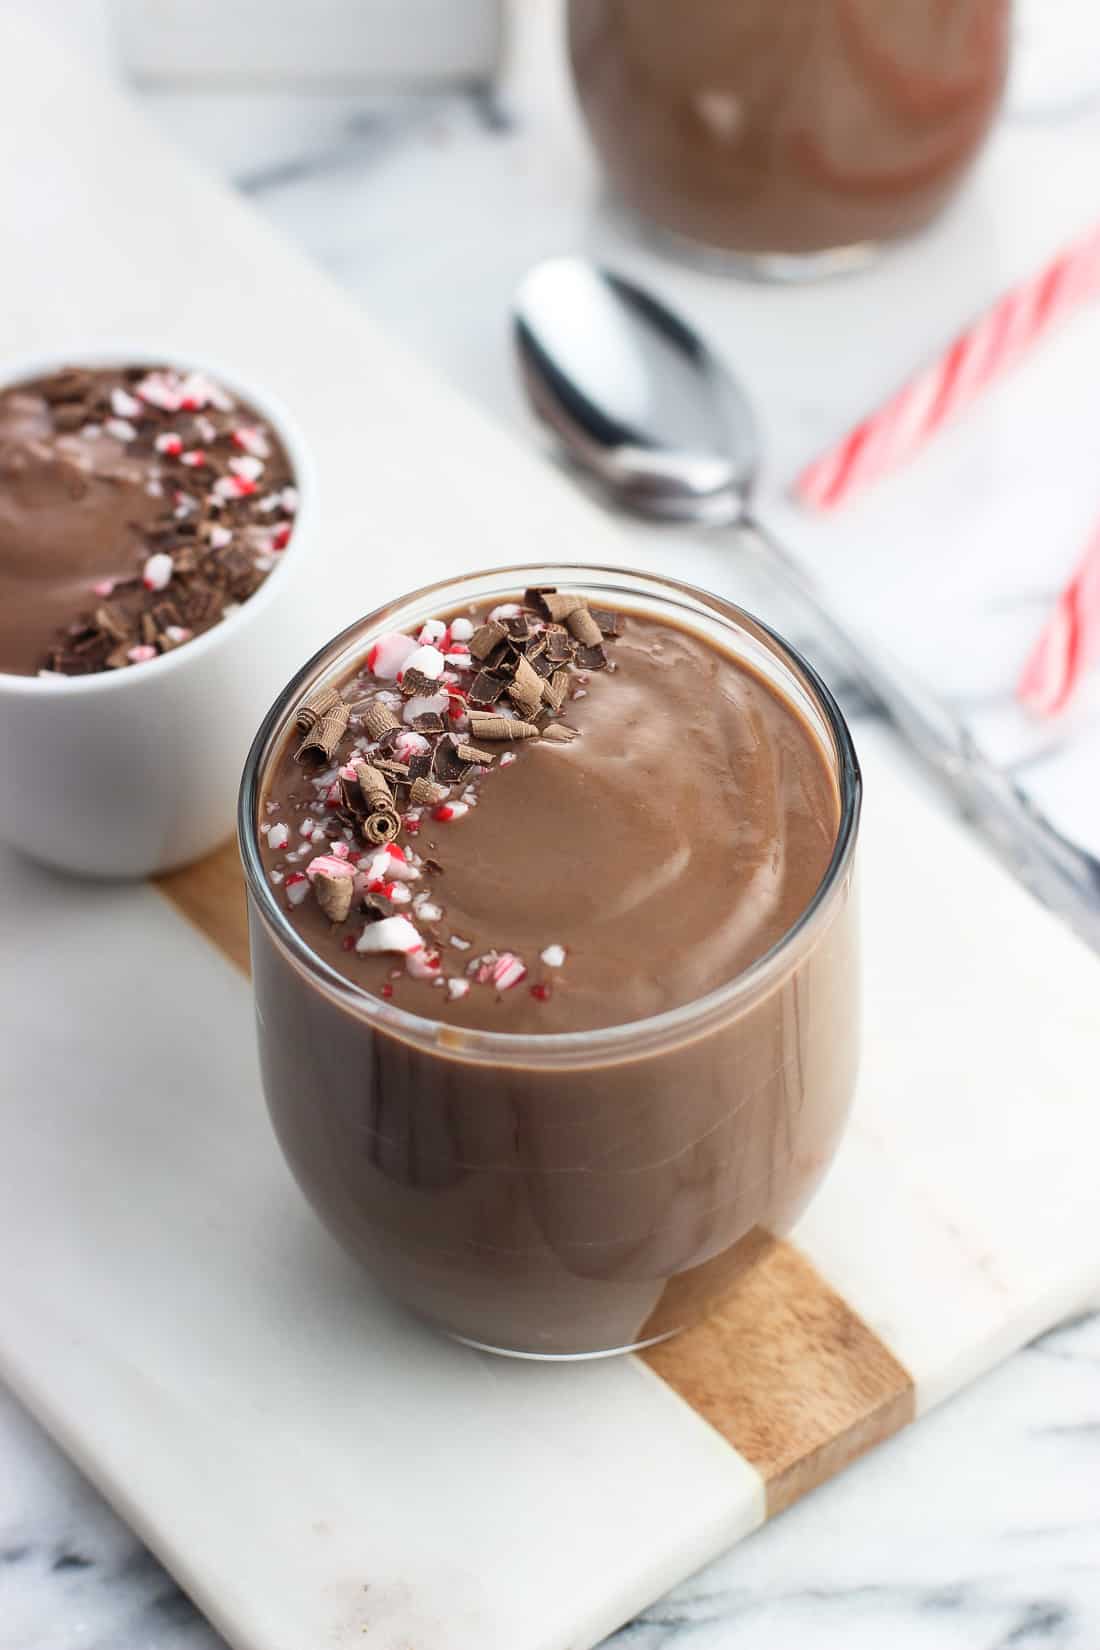 A glass filled with pudding and garnished with a swirl of chocolate shavings and crushed candy cane pieces